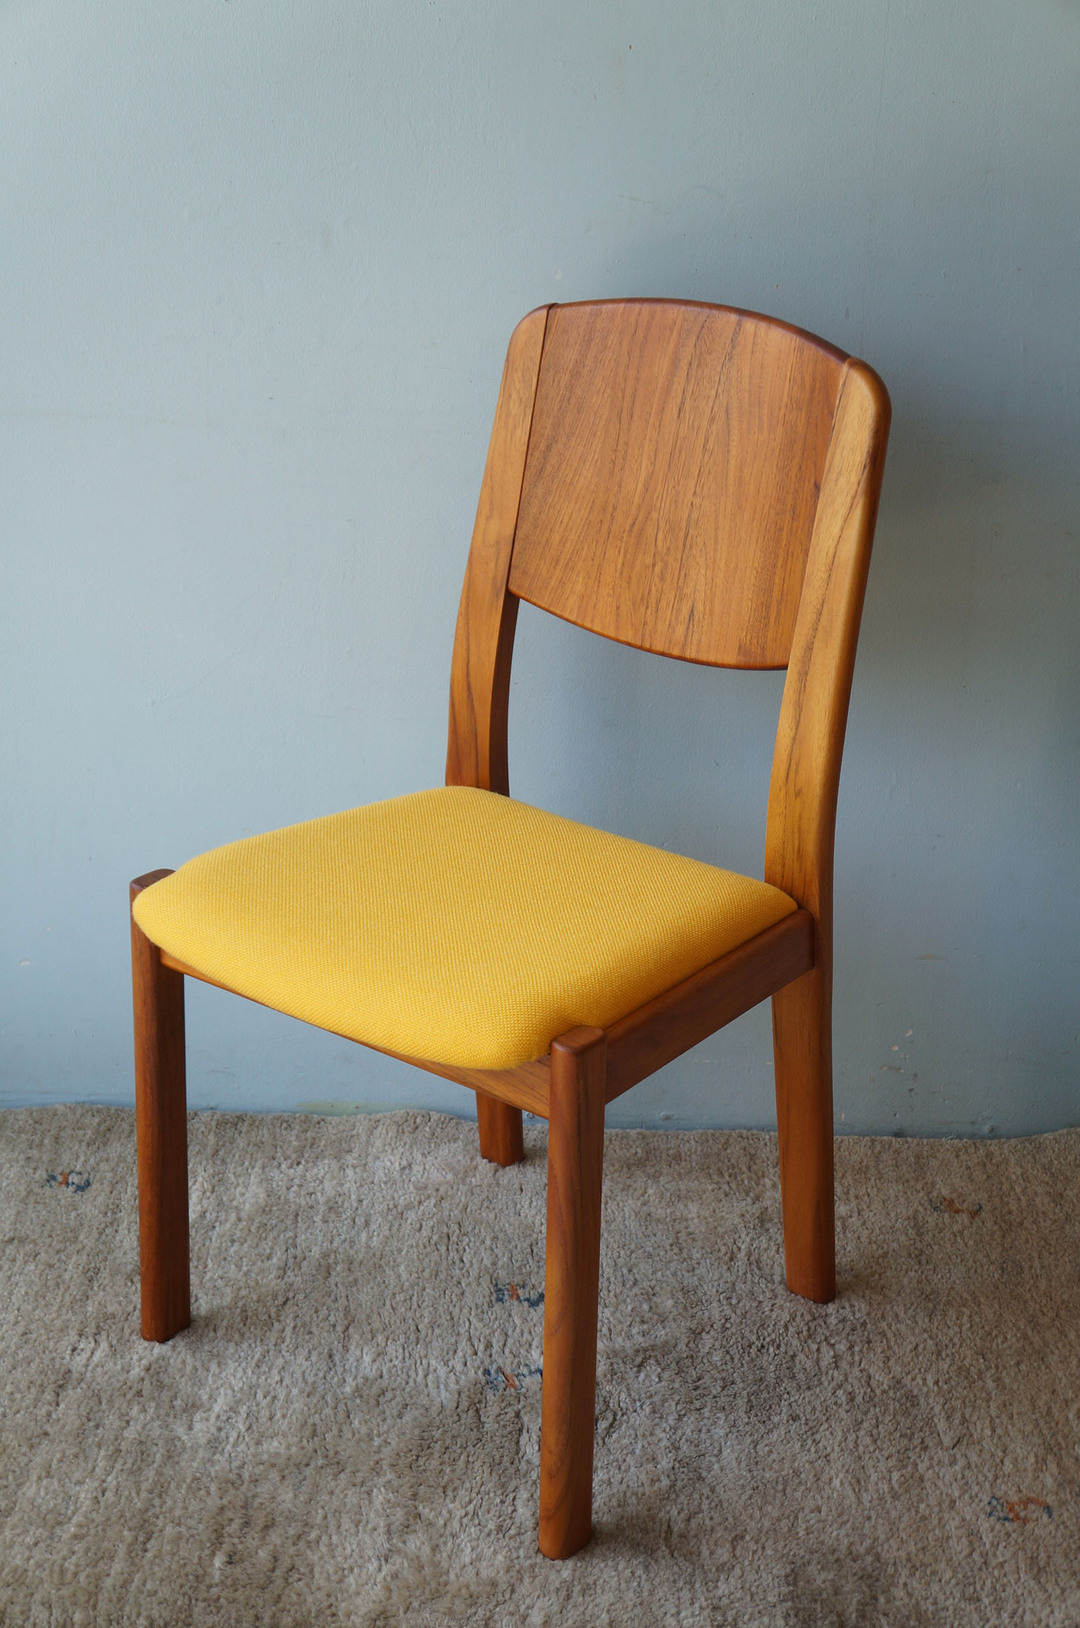 Danish Vintage Dining Chair Koefoeds Hornslet/デンマークヴィンテージ ダイニングチェア コフォード ホーンスレット 椅子 チーク材 北欧モダン 2